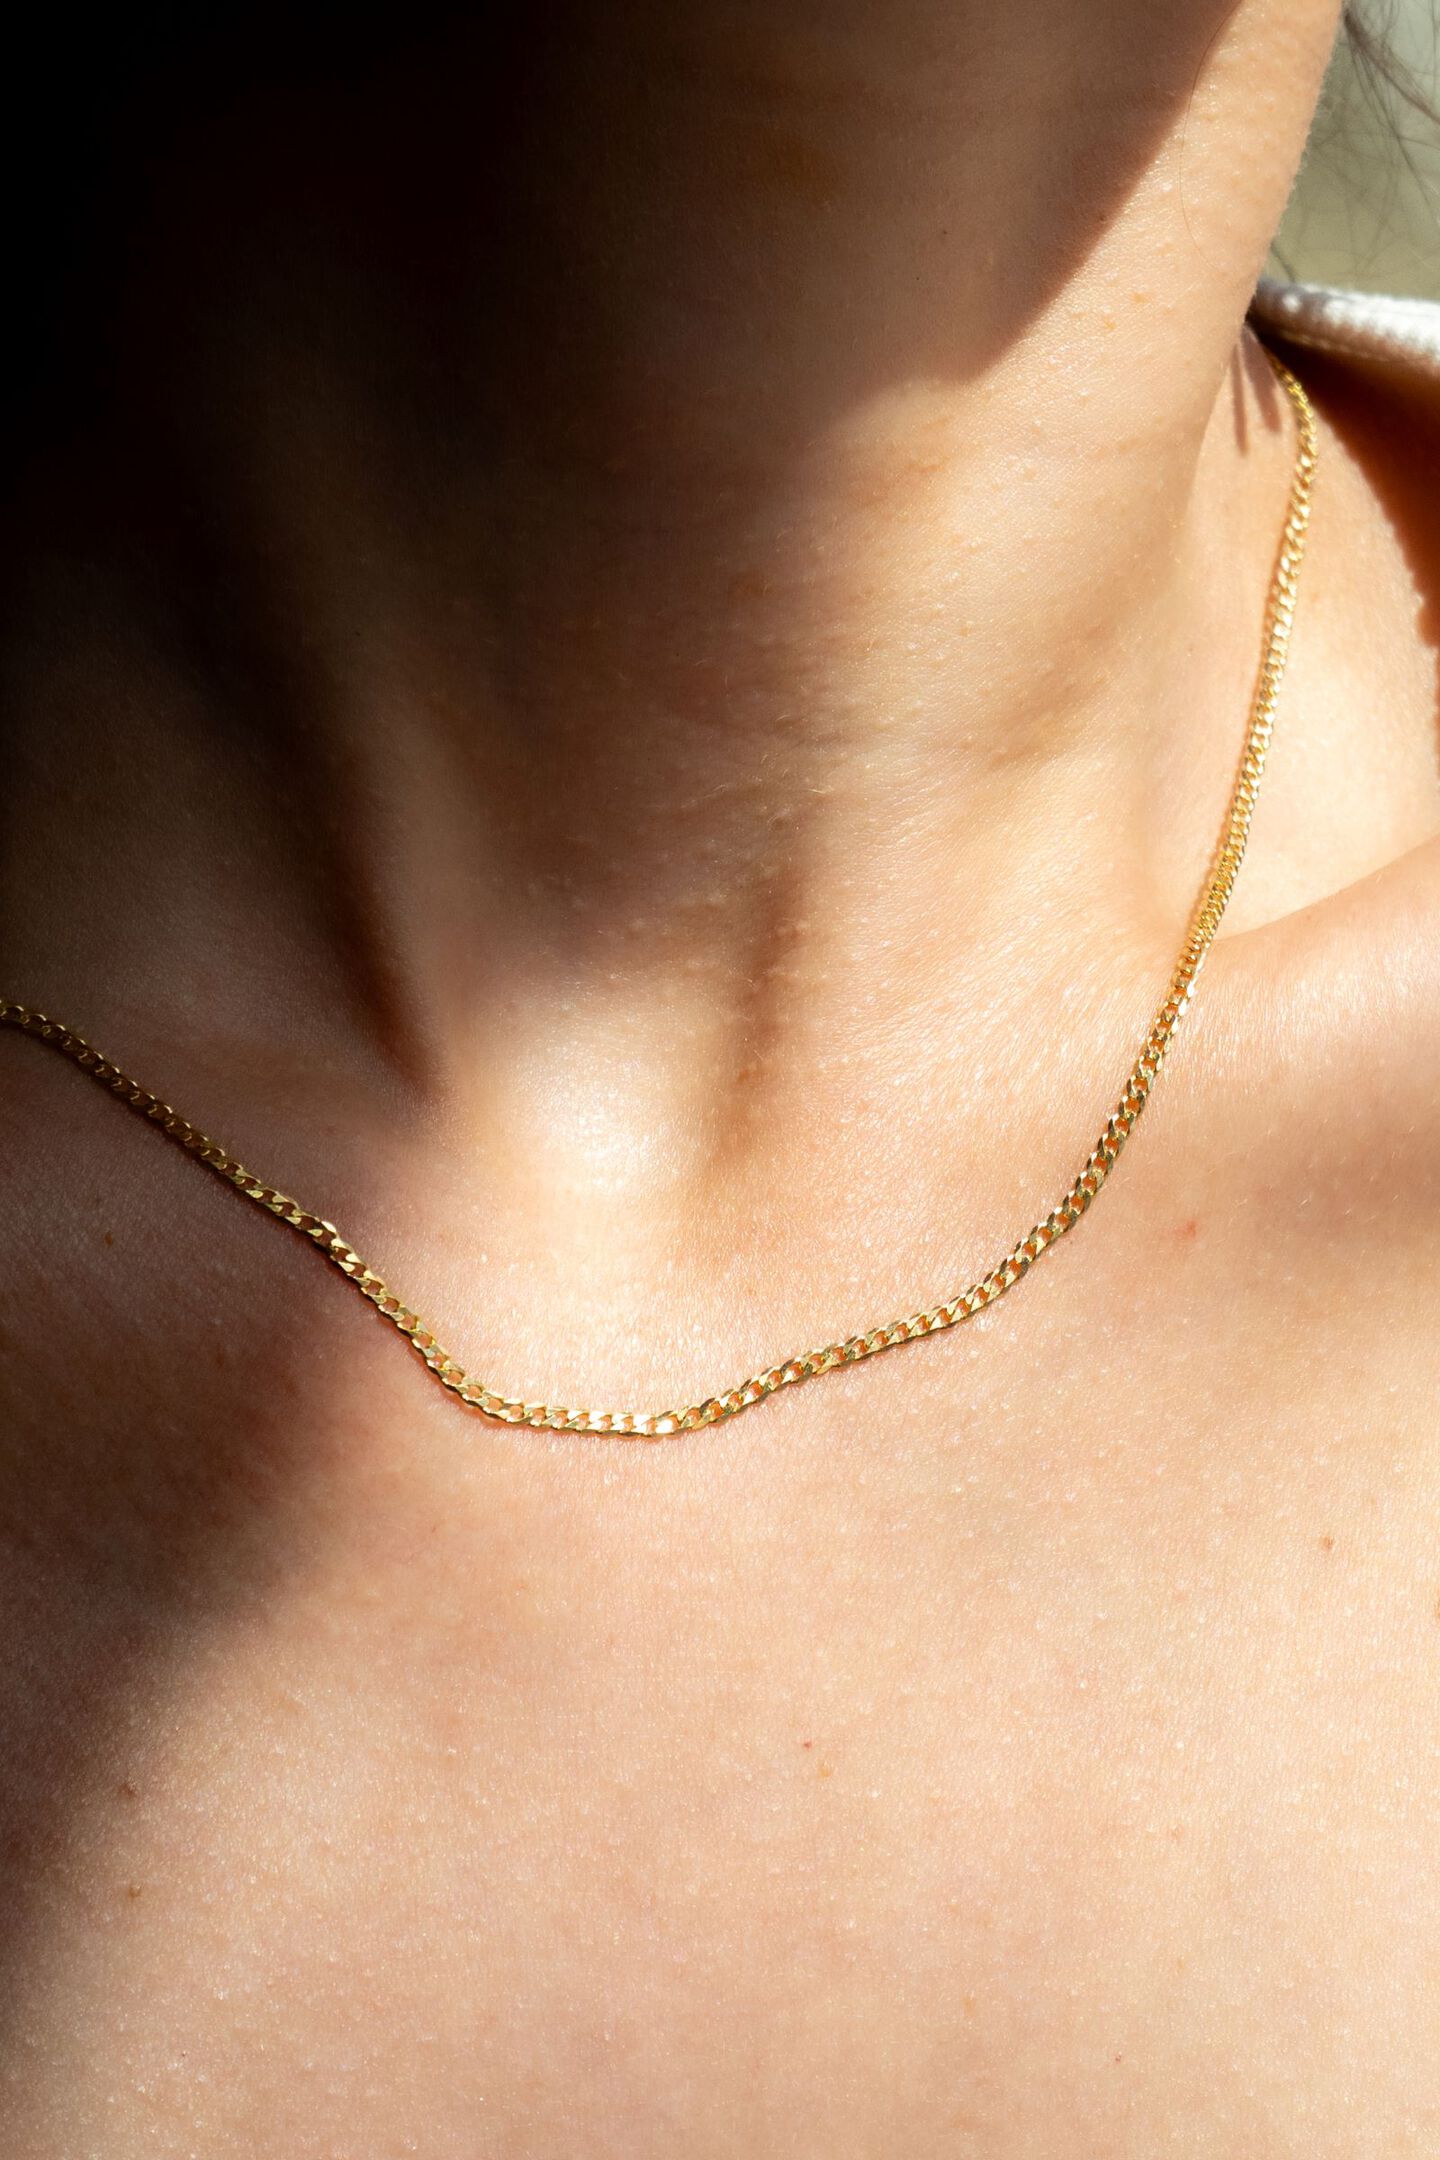 Yellow gold curb chain worn on a woman's neck